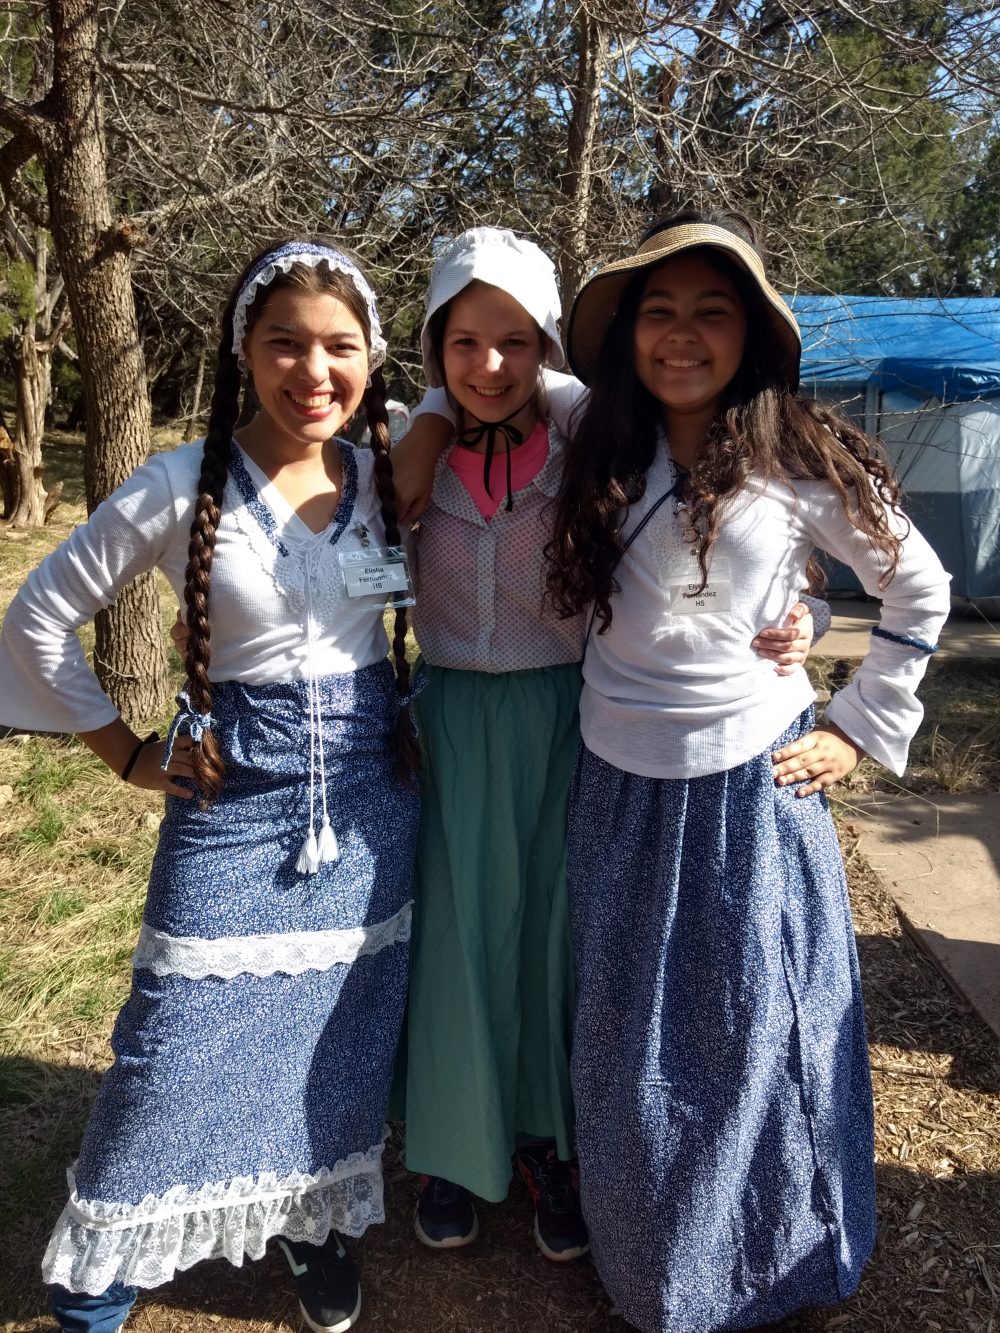 The Great Outdoors - pioneer skit